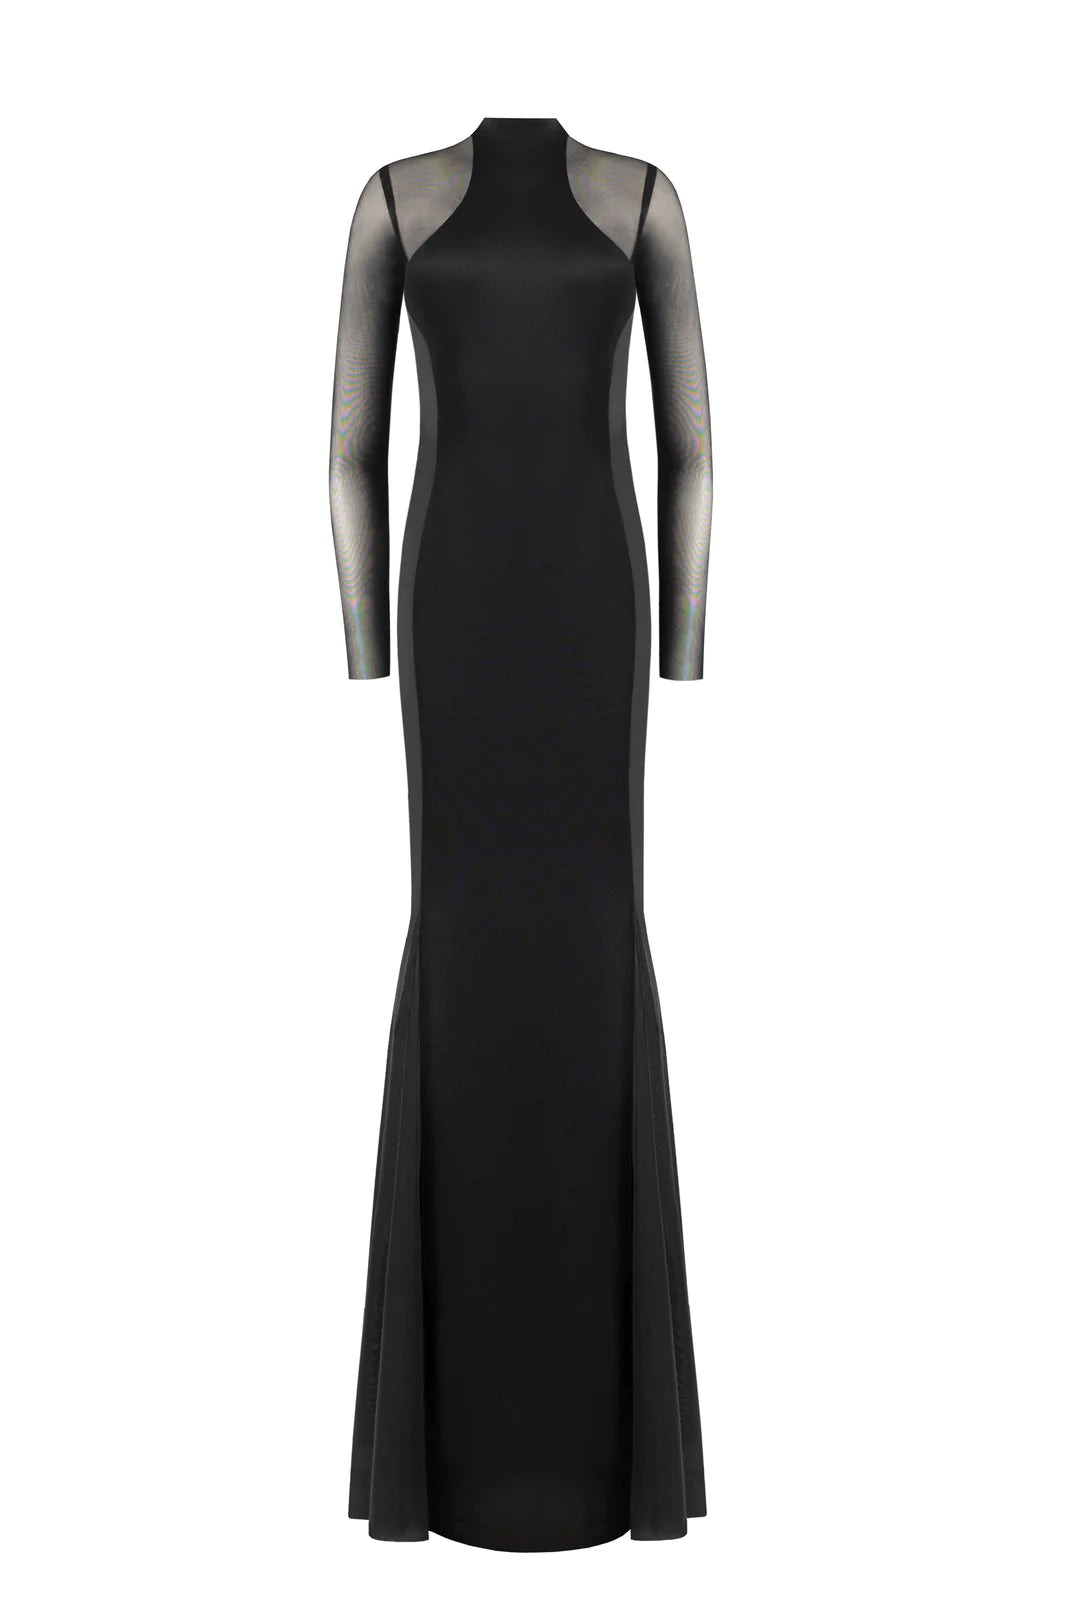 Showstopper black dress with semi-transparent inserts